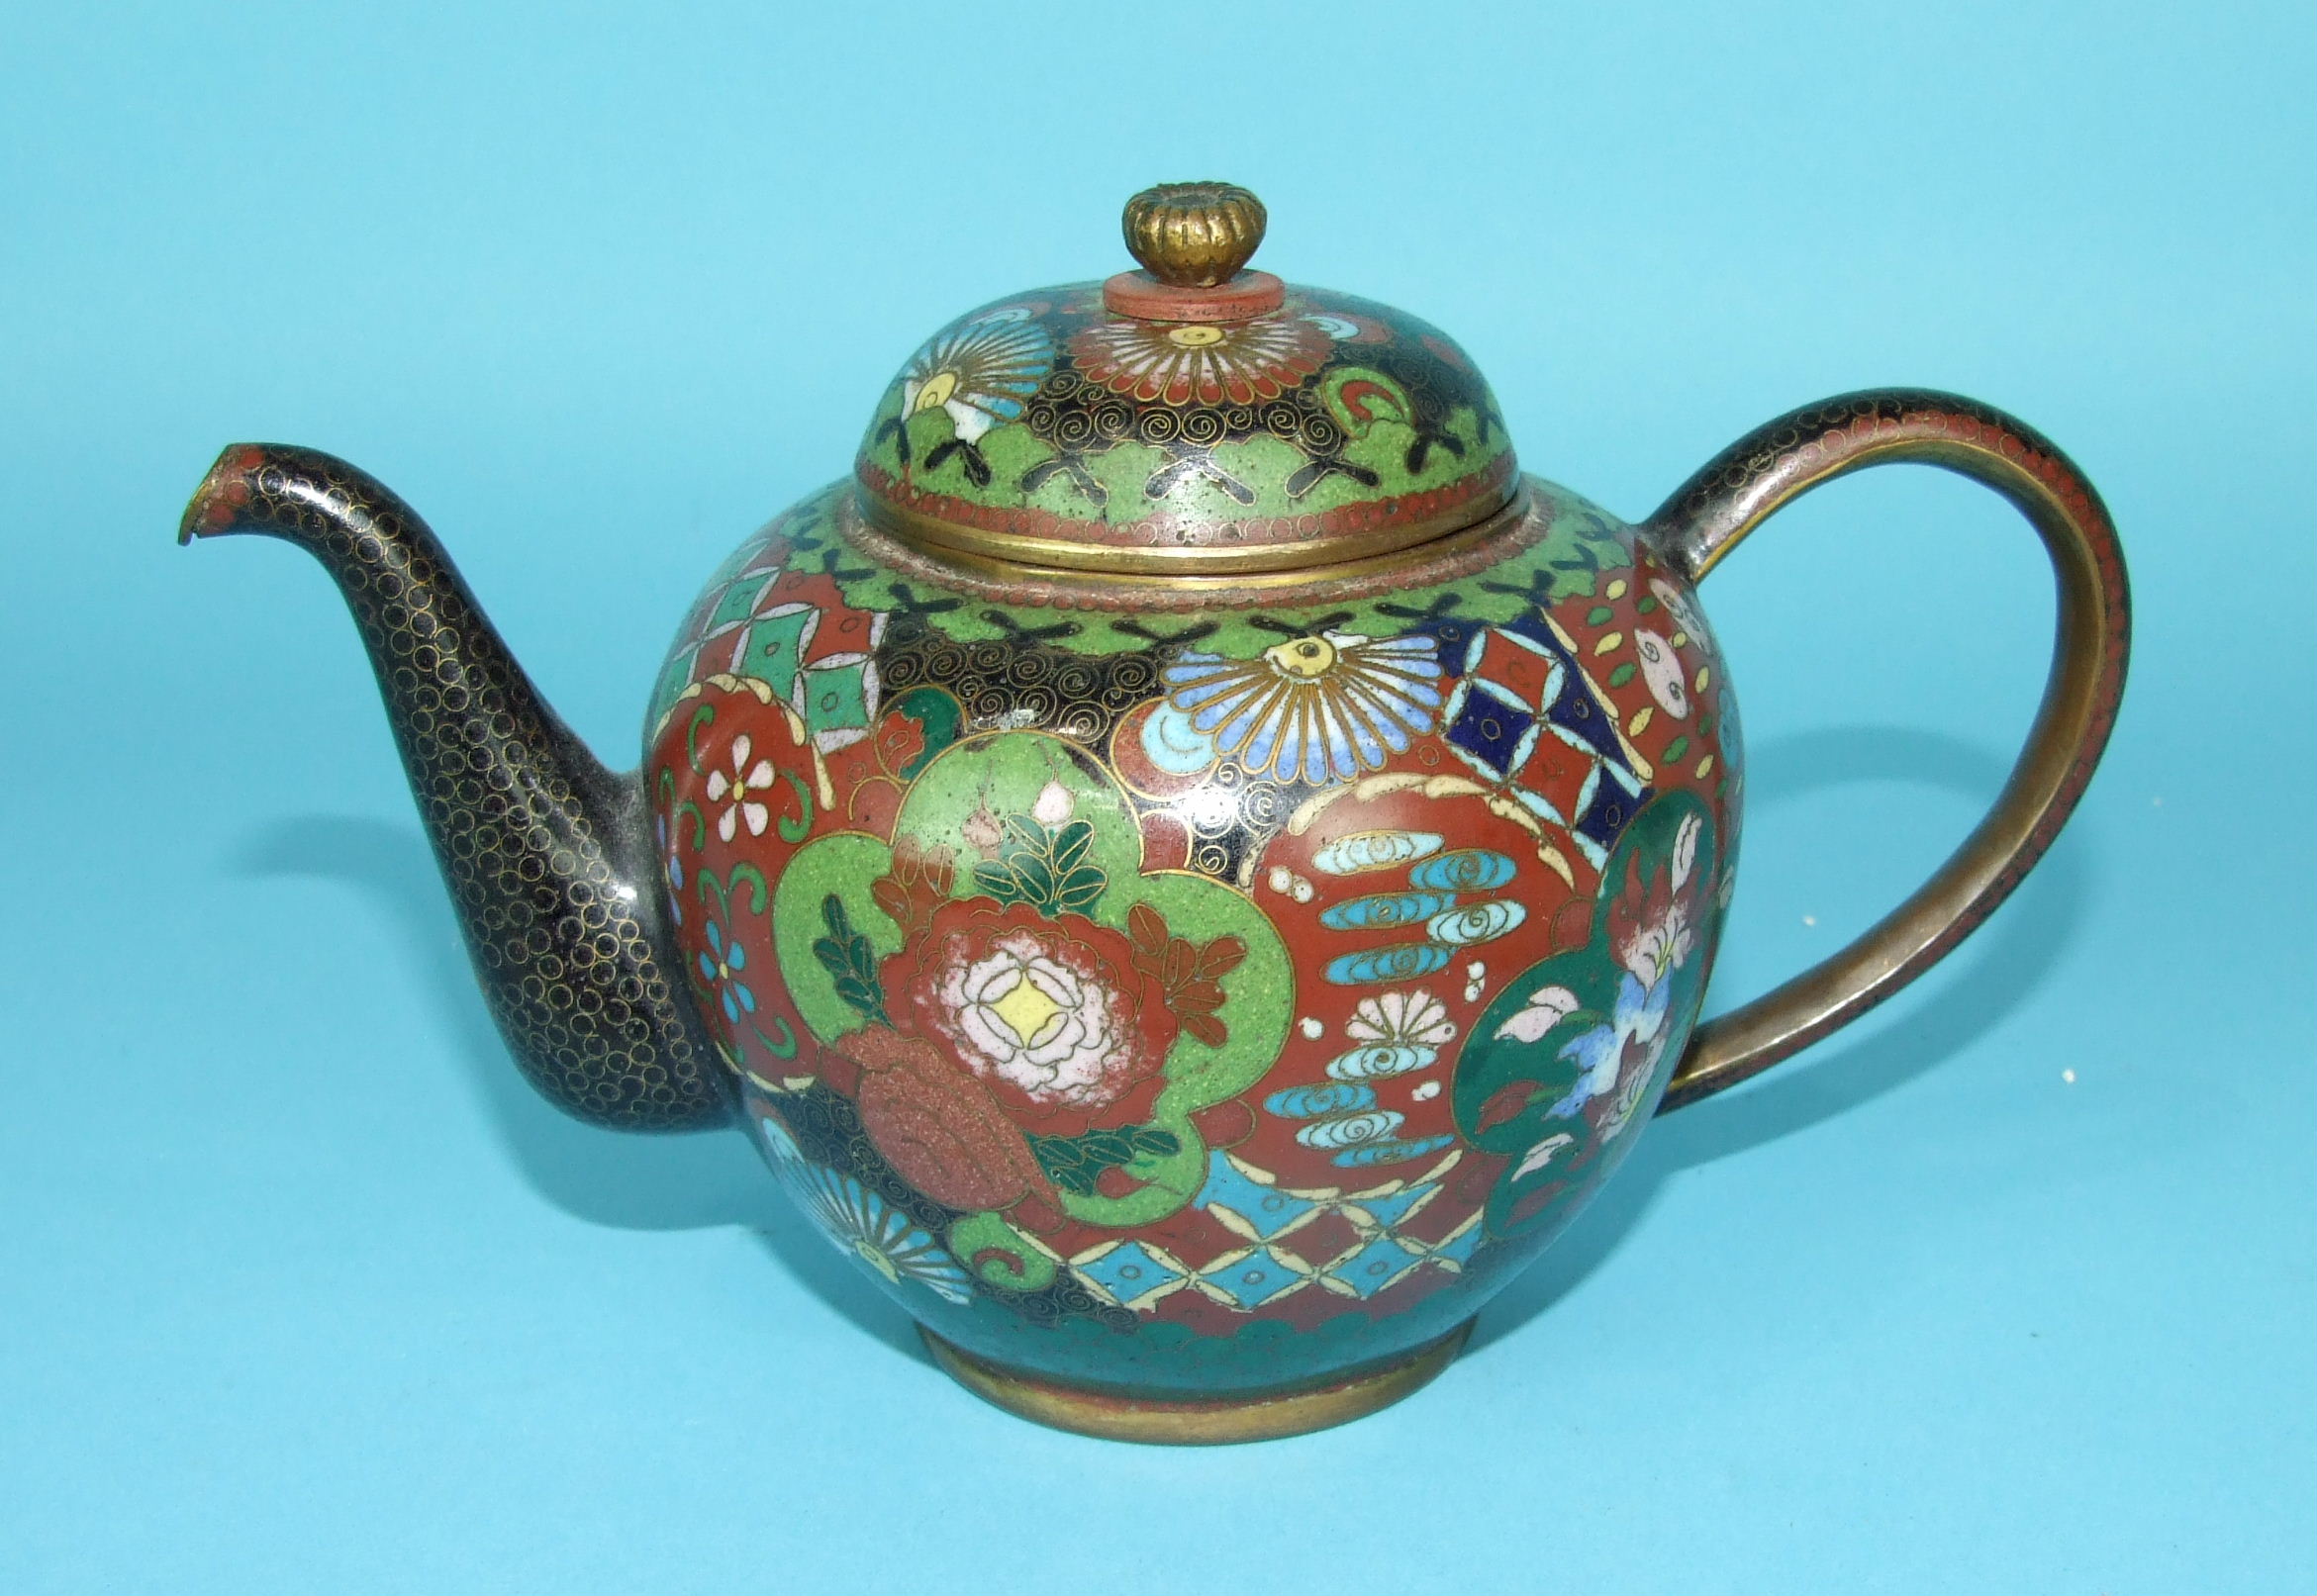 A 19th century Chinese cloisonné teapot and cover decorated with panels of flowers, on a brocade - Image 2 of 3